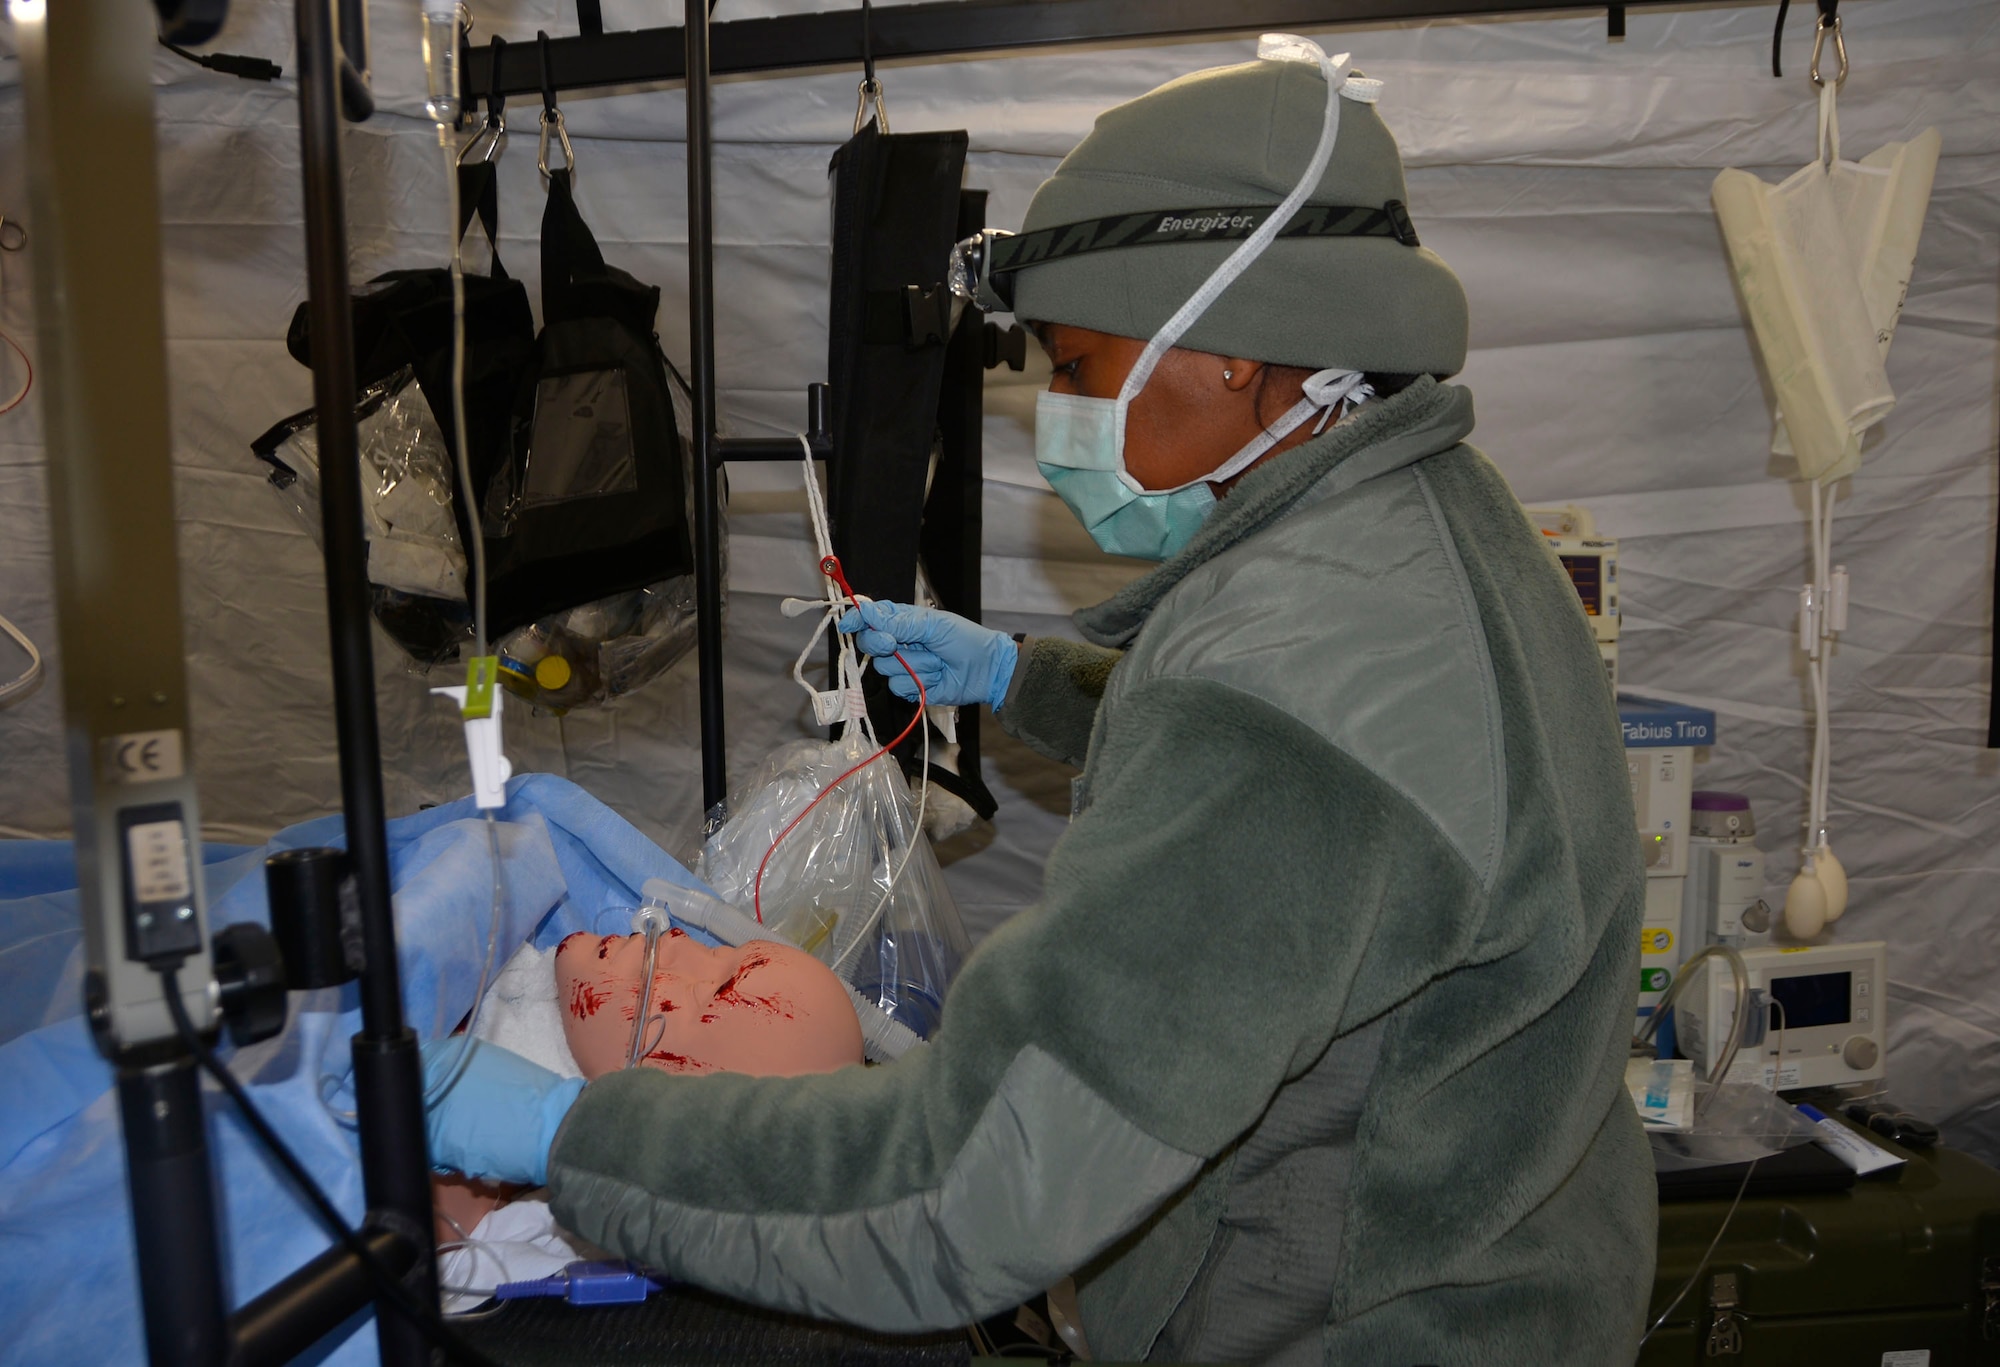 Maj. Stacy Carr, nurse anesthetist, 81st Medical Group, Keesler Air Force Base, Miss., prepares a simulated patient for surgery April 19, 2018 during the Expeditionary Medical Support (EMEDS) field confirmation exercise here. The confirmation exercise is evaluating the tactics, techniques and procedures of EMEDS operations during a domestic U.S. contingency such as a natural disaster. (U.S. Air Force photo by Mary McHale)